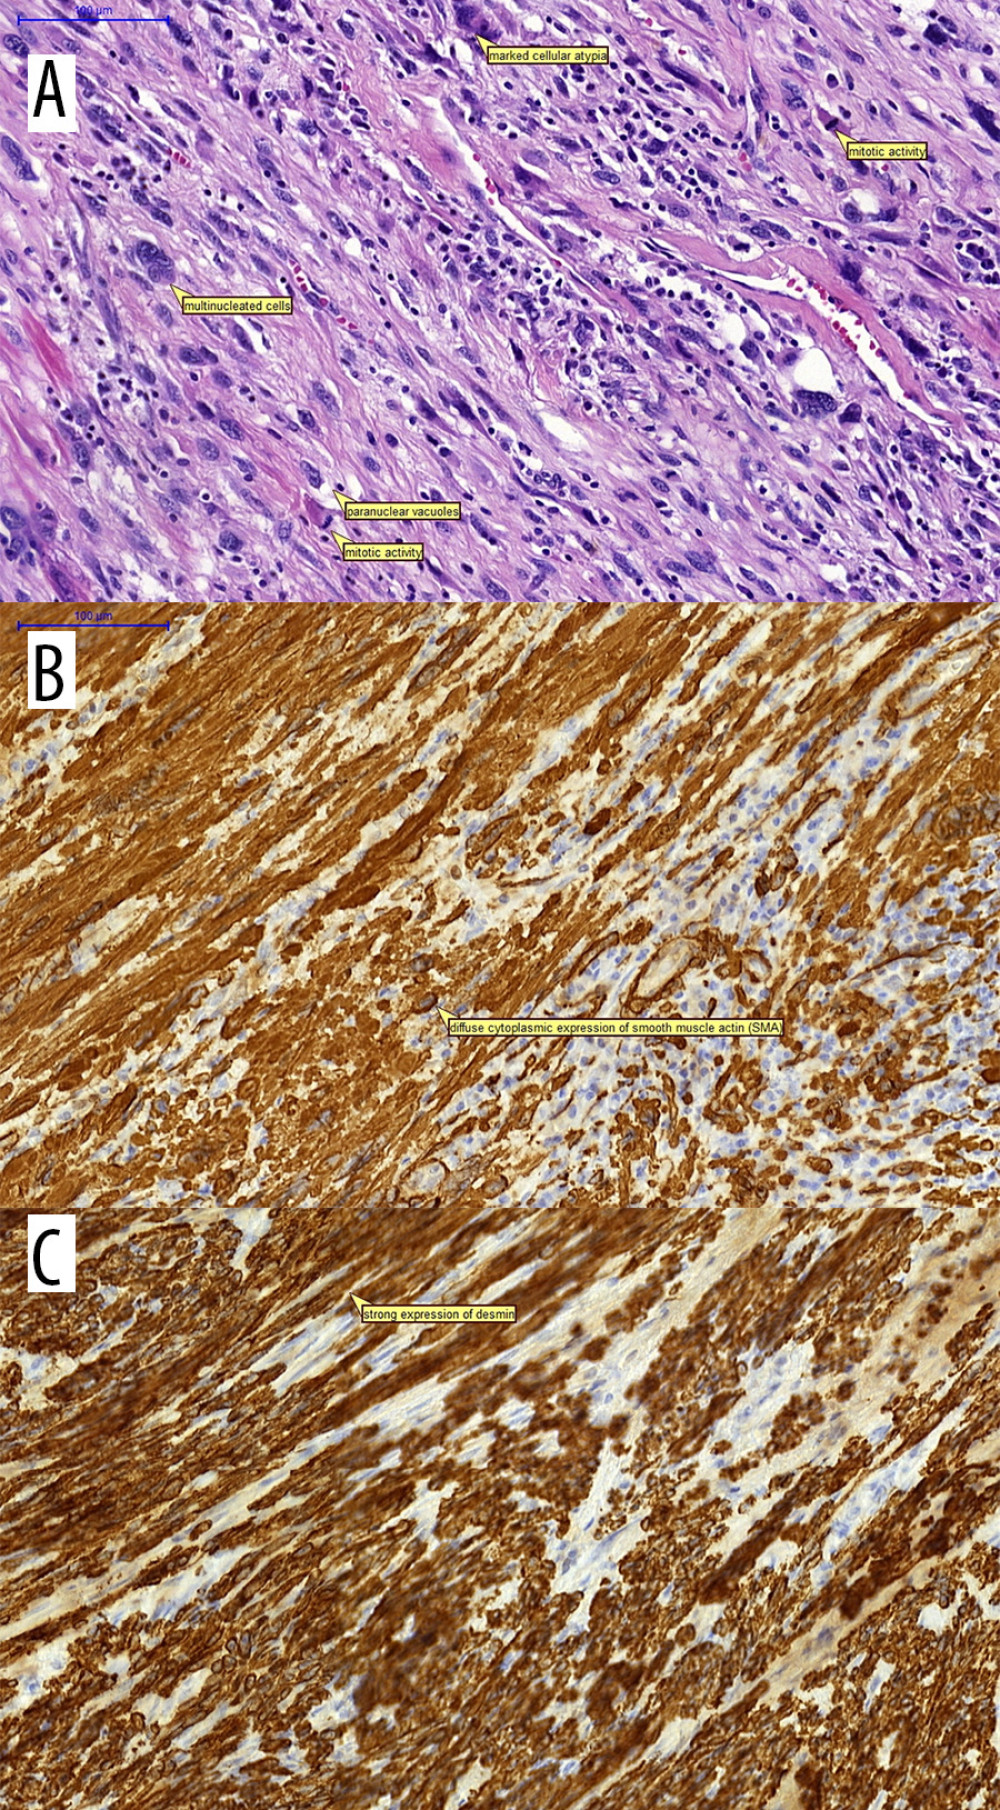 Histopathologic evaluation. (A) Leiomyosarcoma (hematoxylin and eosin staining), in which tumor cells exhibit nuclear atypia with hyperchromatic nuclei and prominent nucleoli. Original magnification ×20. (B) Immunohistochemical staining of smooth-muscle actin (SMA). Original magnification ×20. (C) Immunohistochemical staining of desmin. Original magnification ×20.